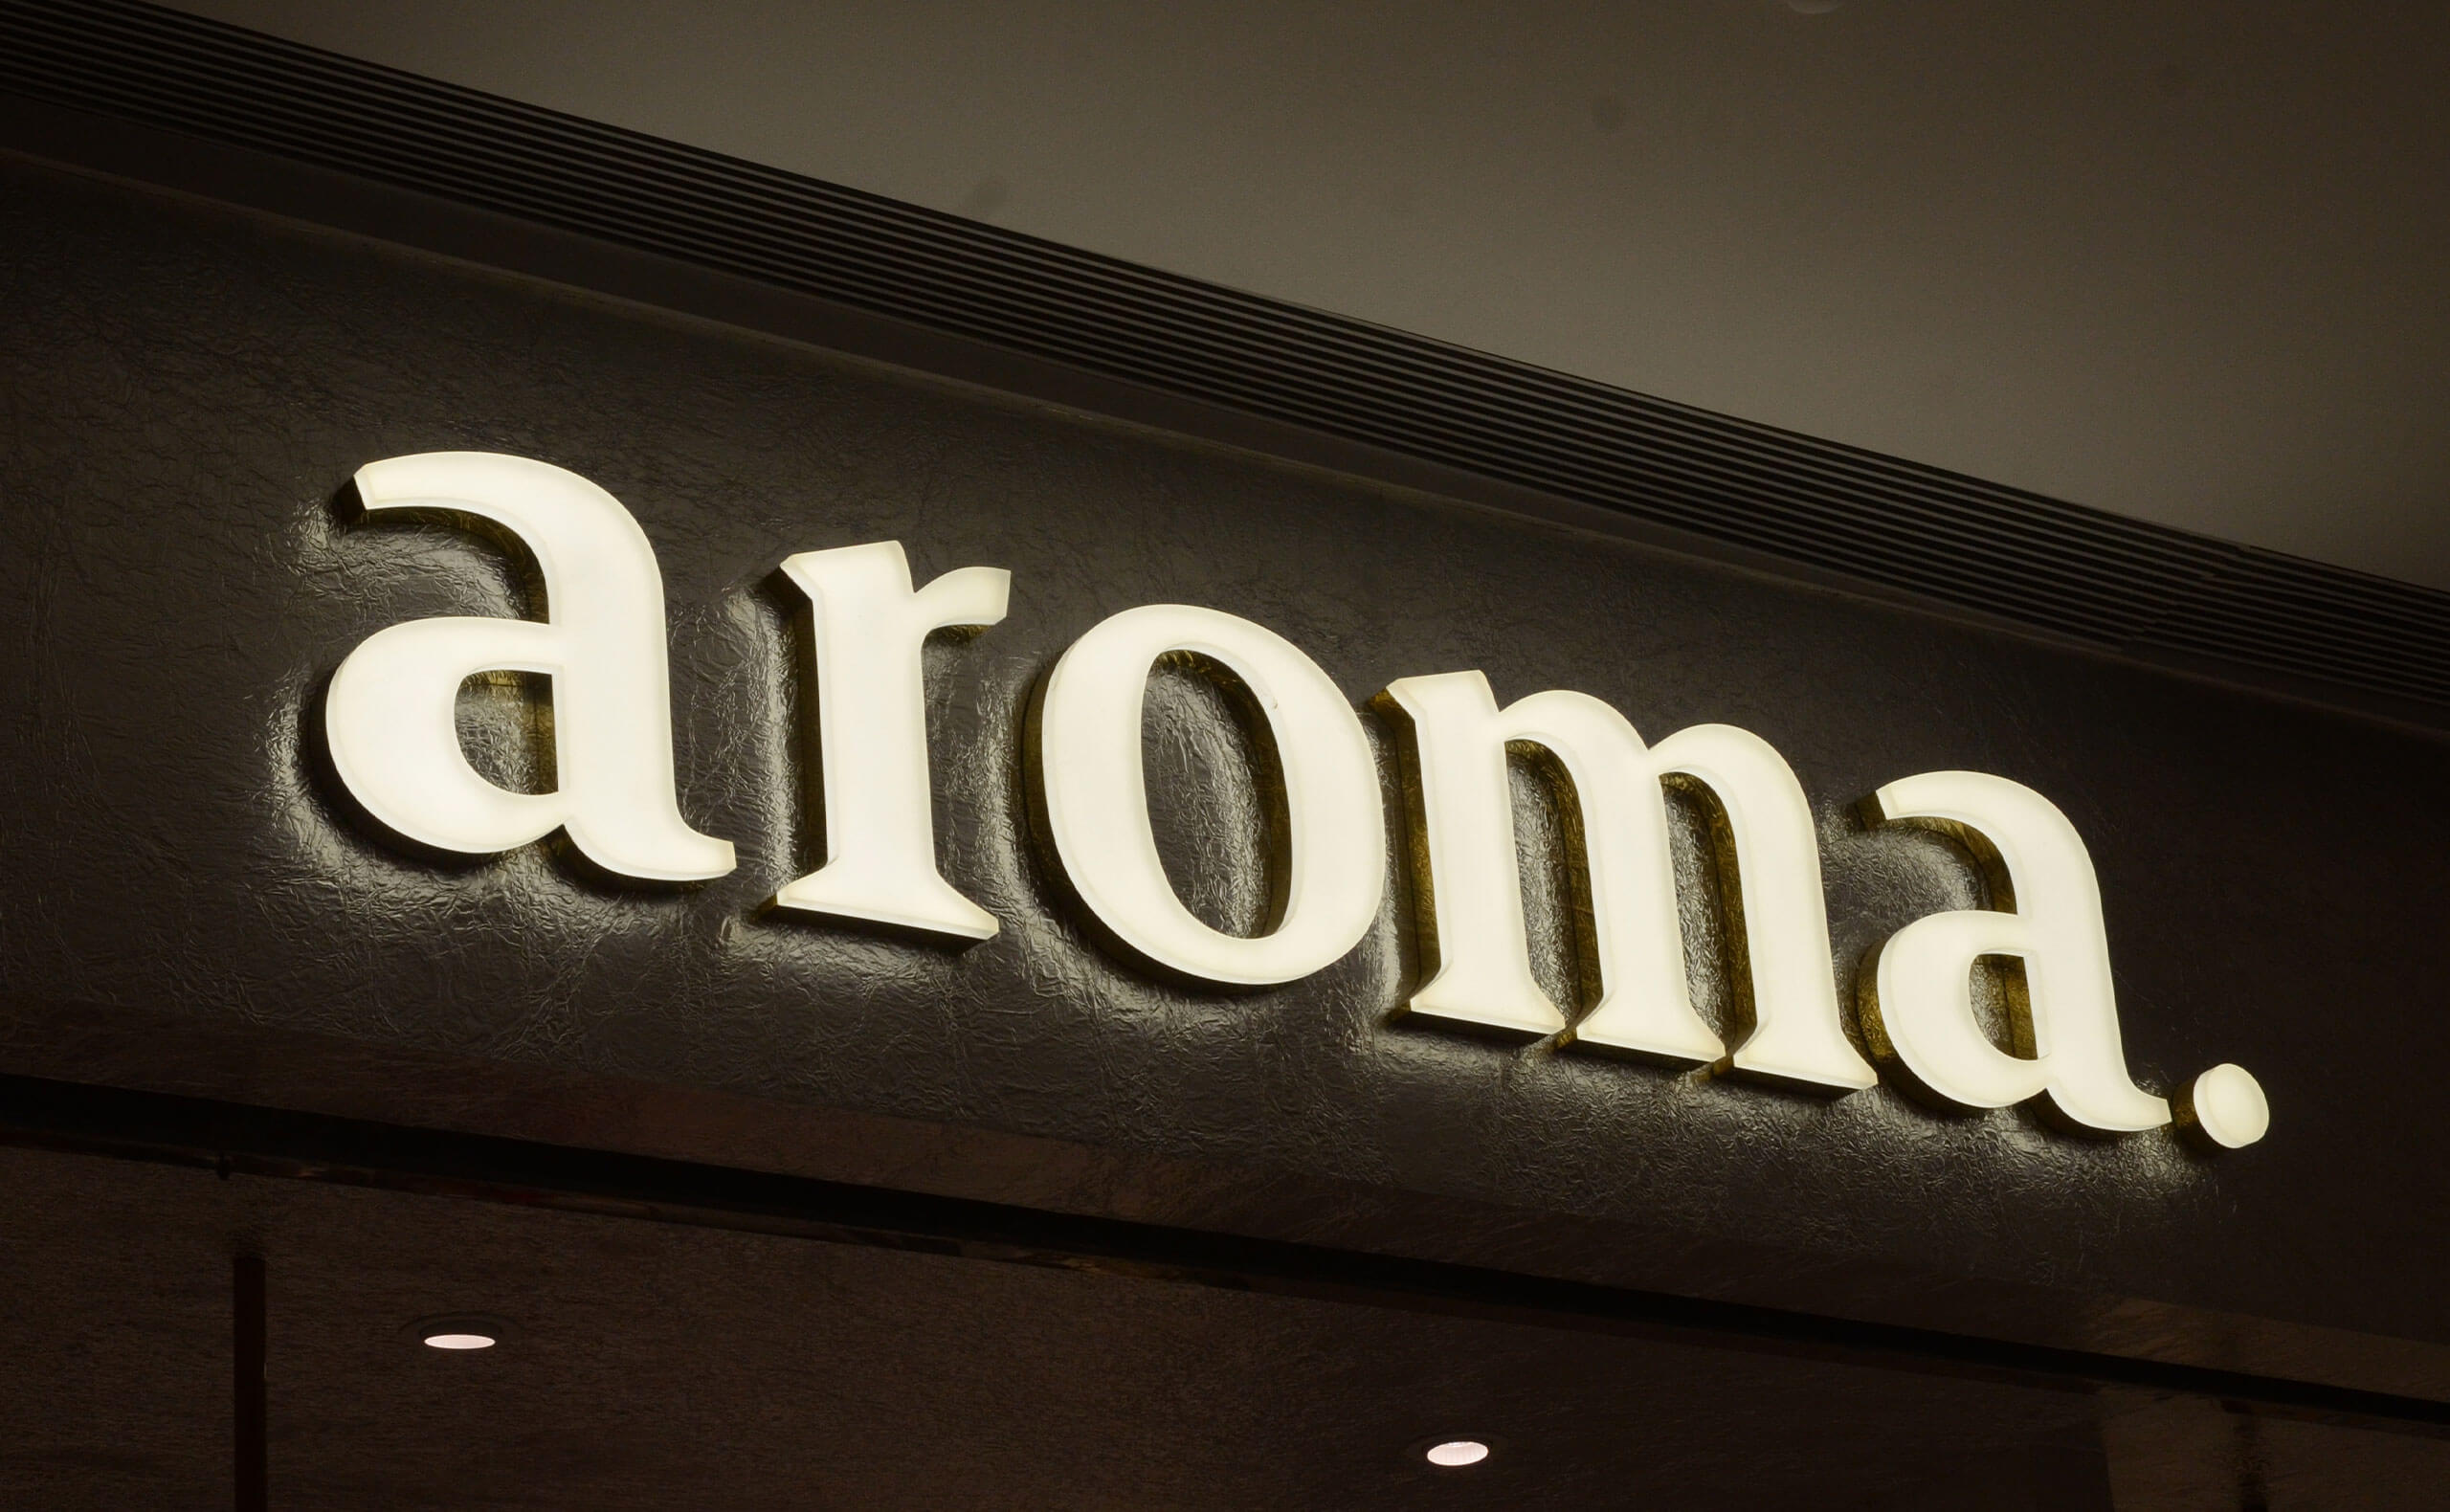 Metal Front Lit Trimless Channel Letters For Aroma